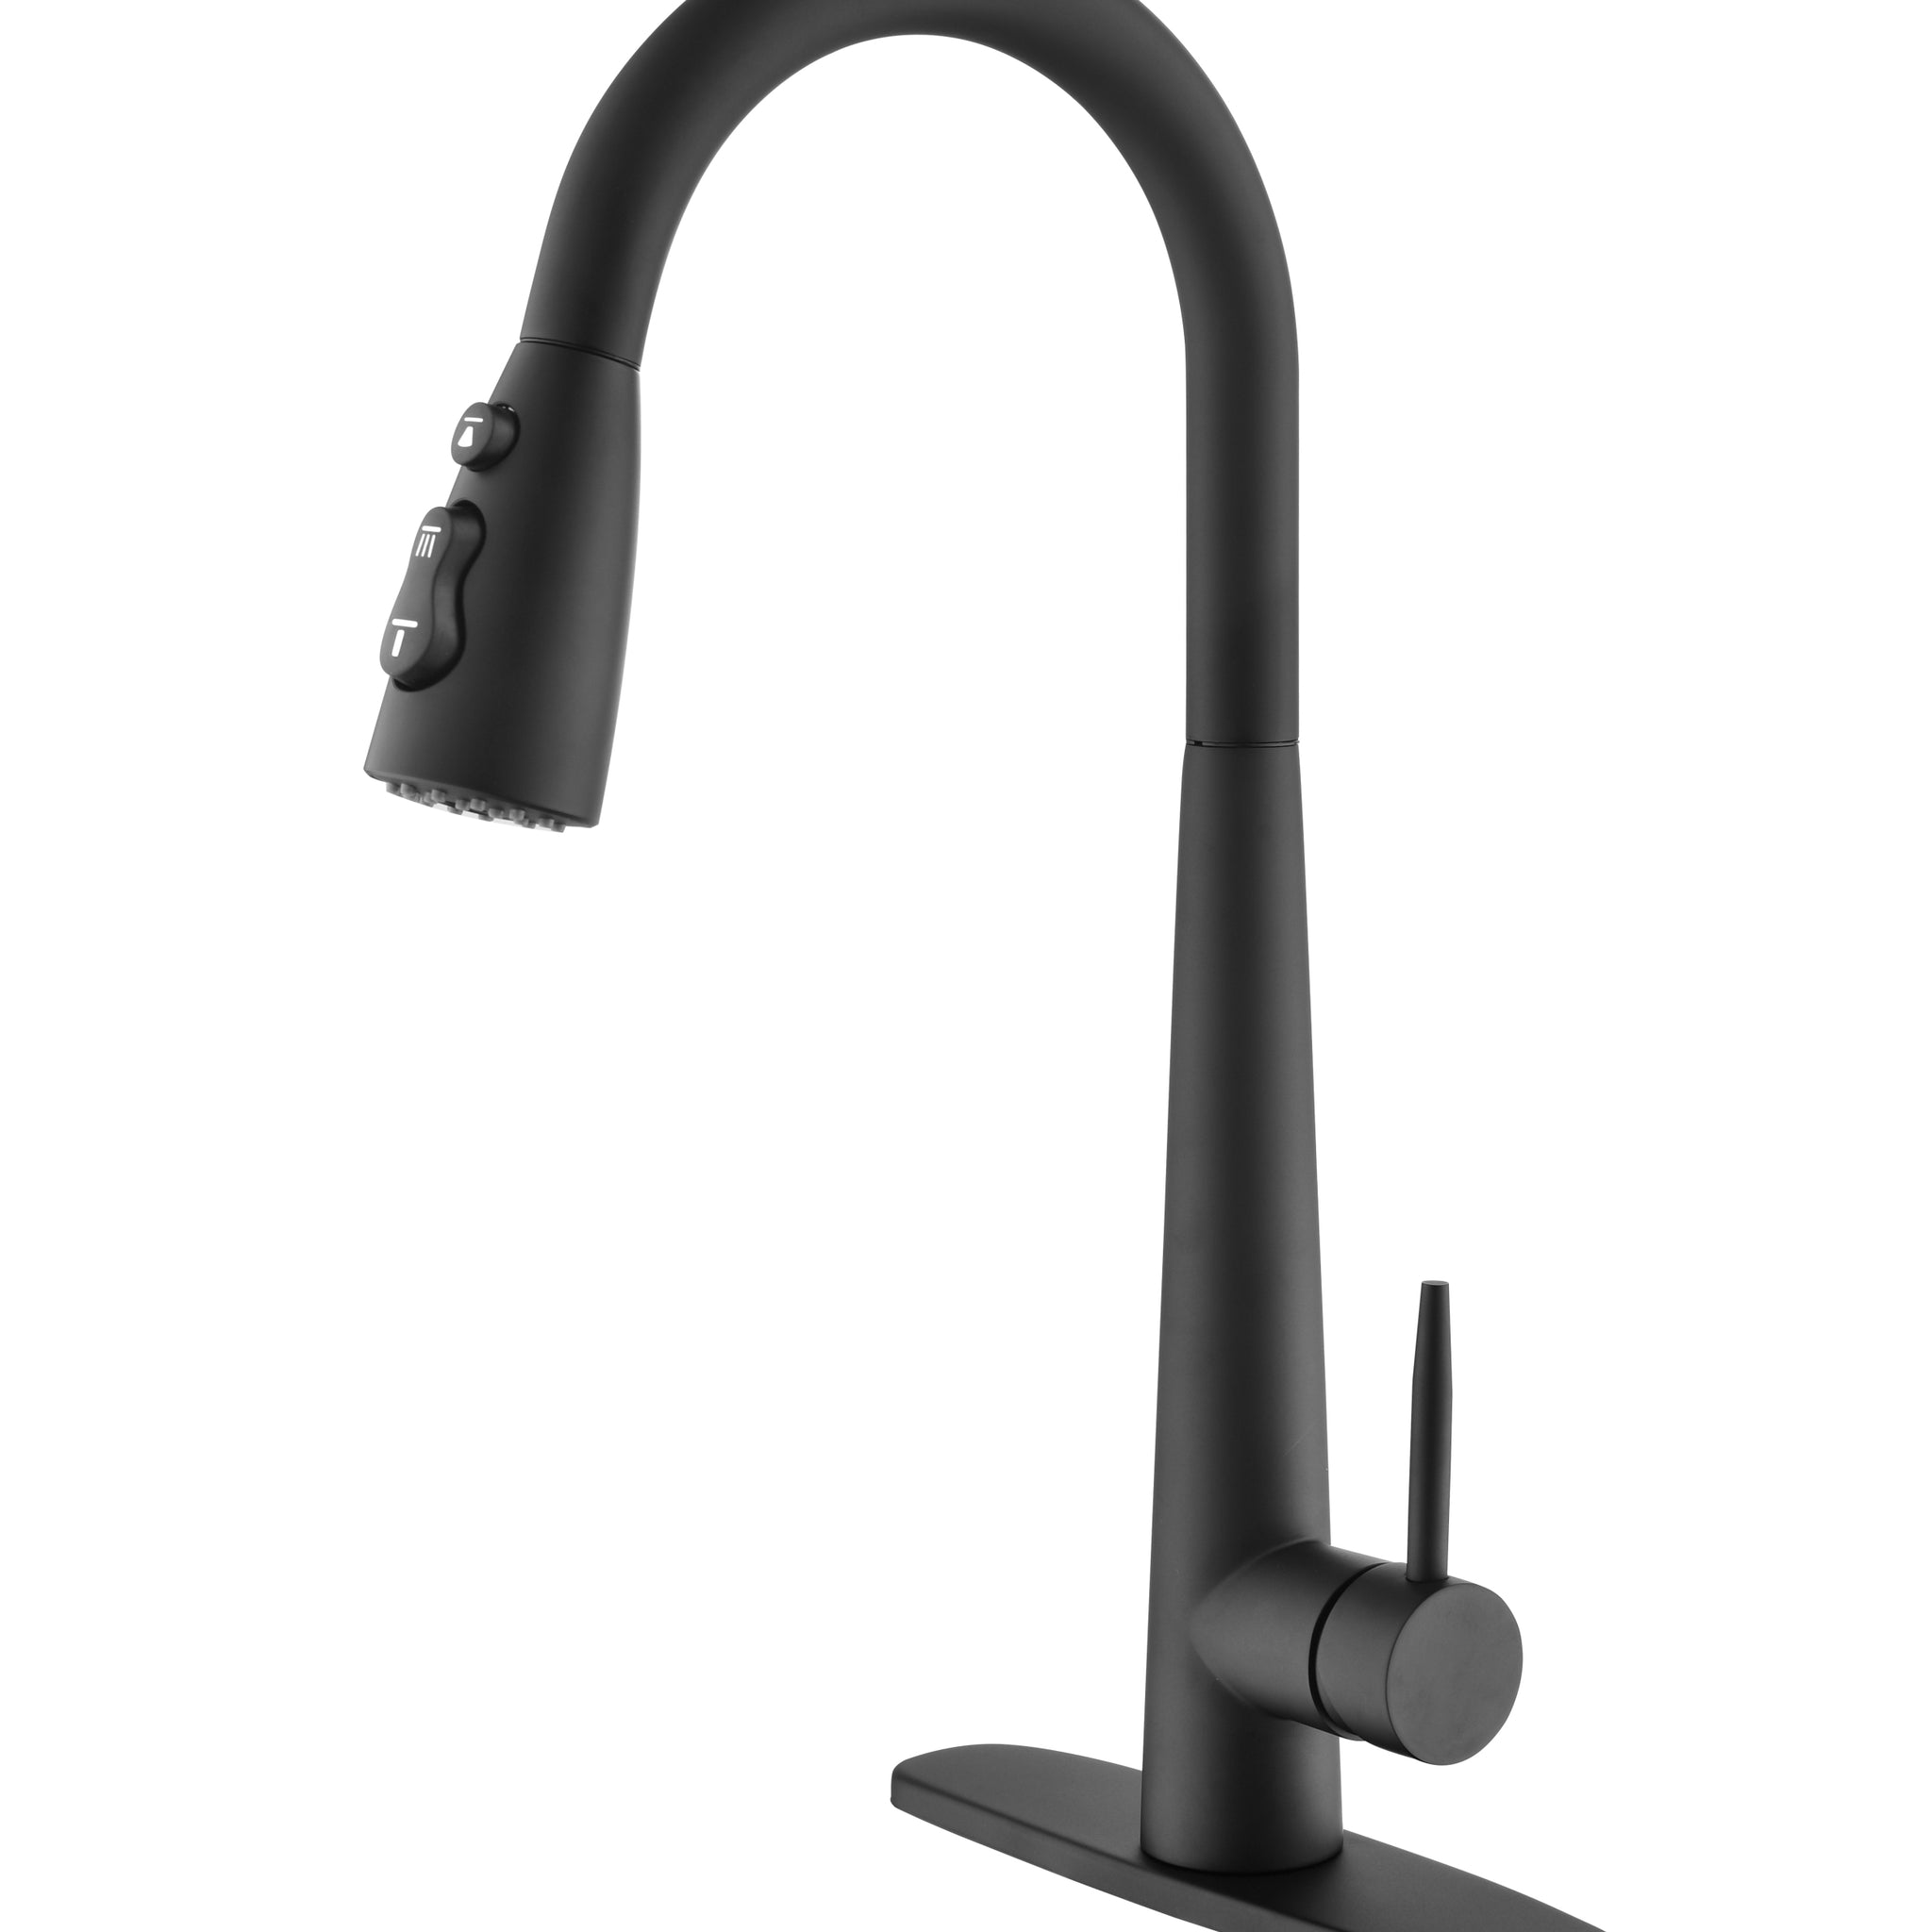 Kitchen Faucet With Pull Down Sprayerhigh Arc